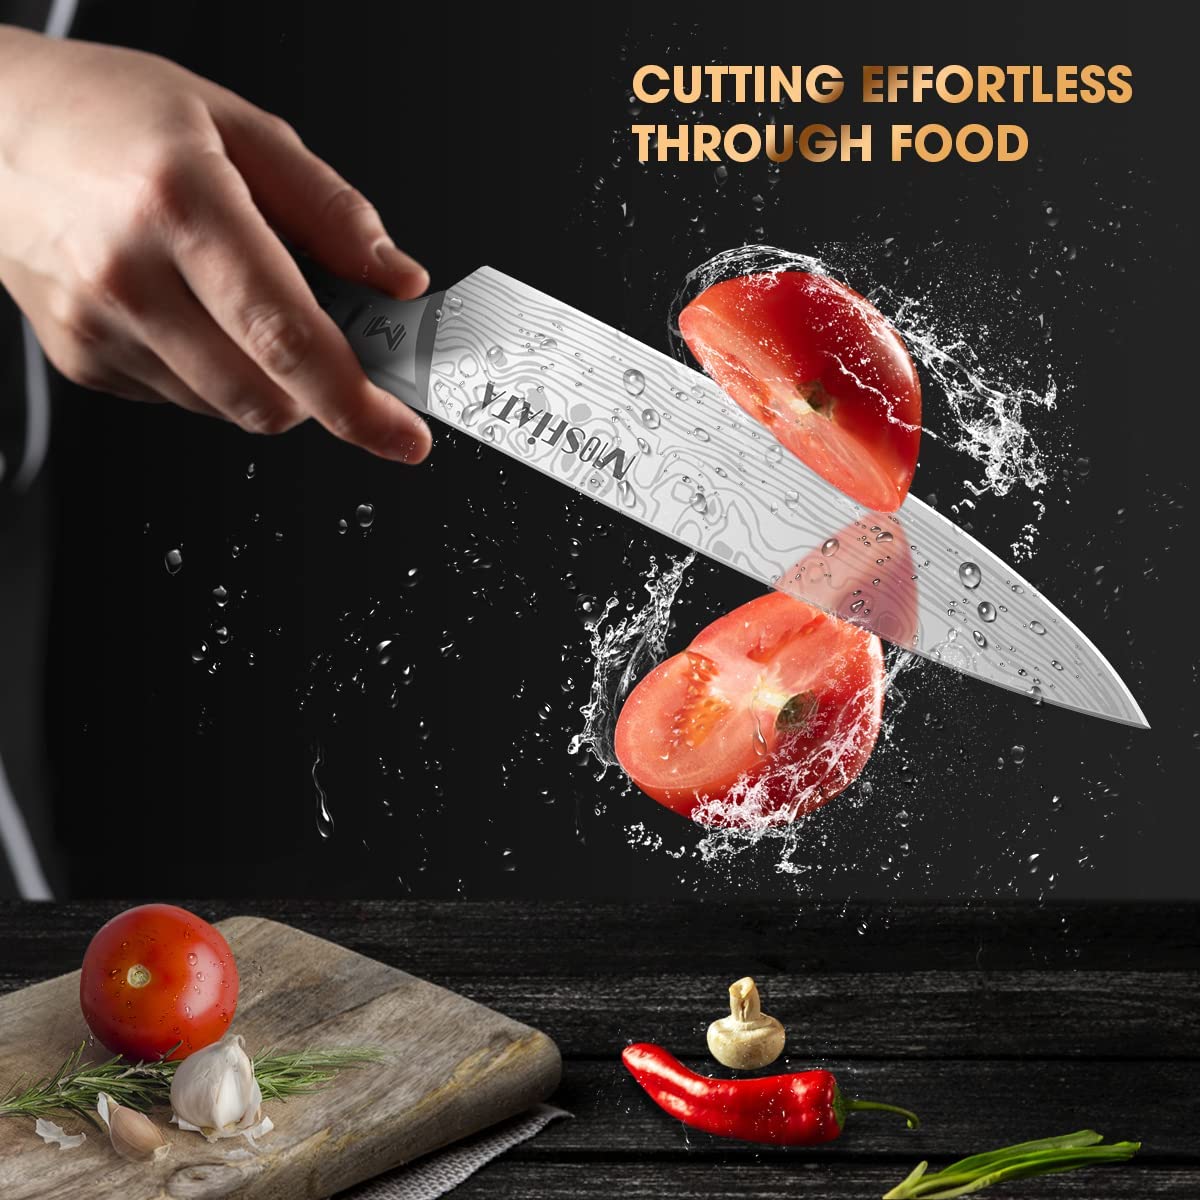 MOSFiATA 5 PCS Chef Knife Set, German High Carbon Stainless Steel